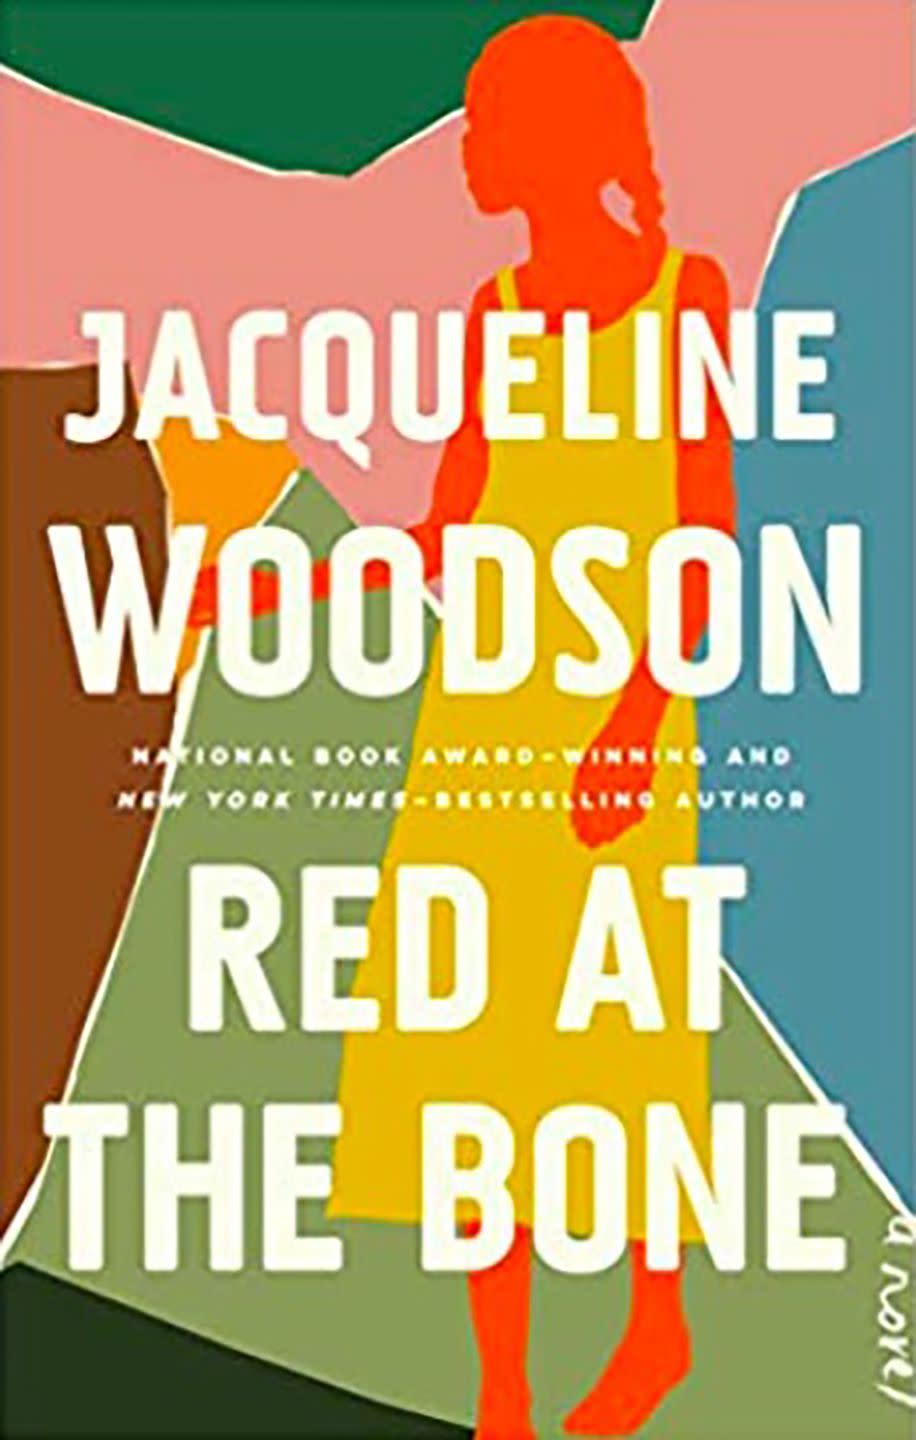 Red At The Bone by Jacqueline Woodson